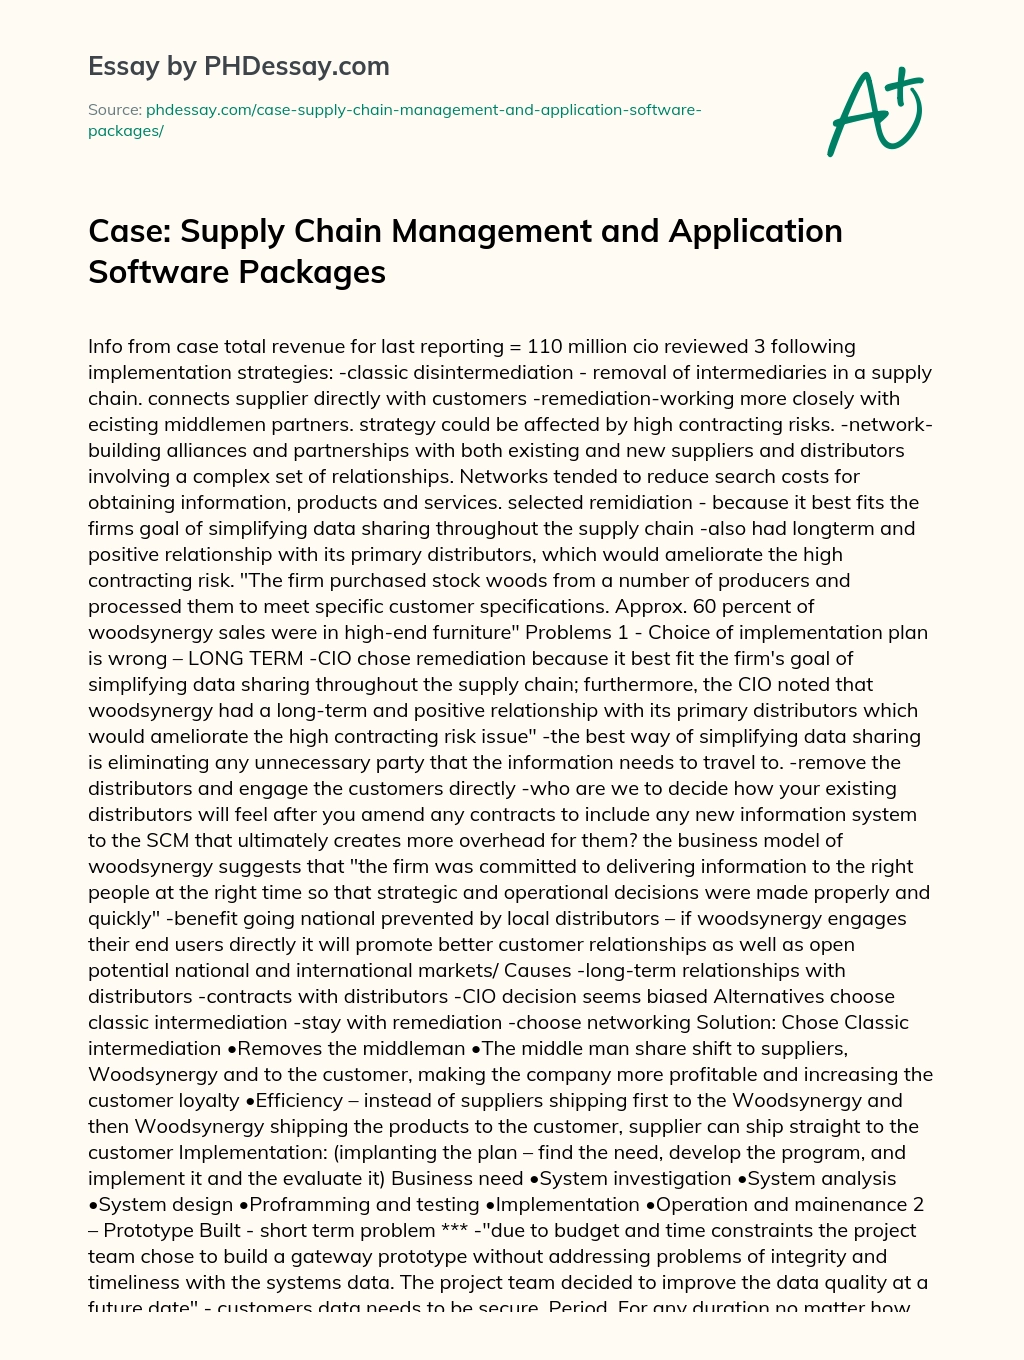 Case: Supply Chain Management and Application Software Packages essay